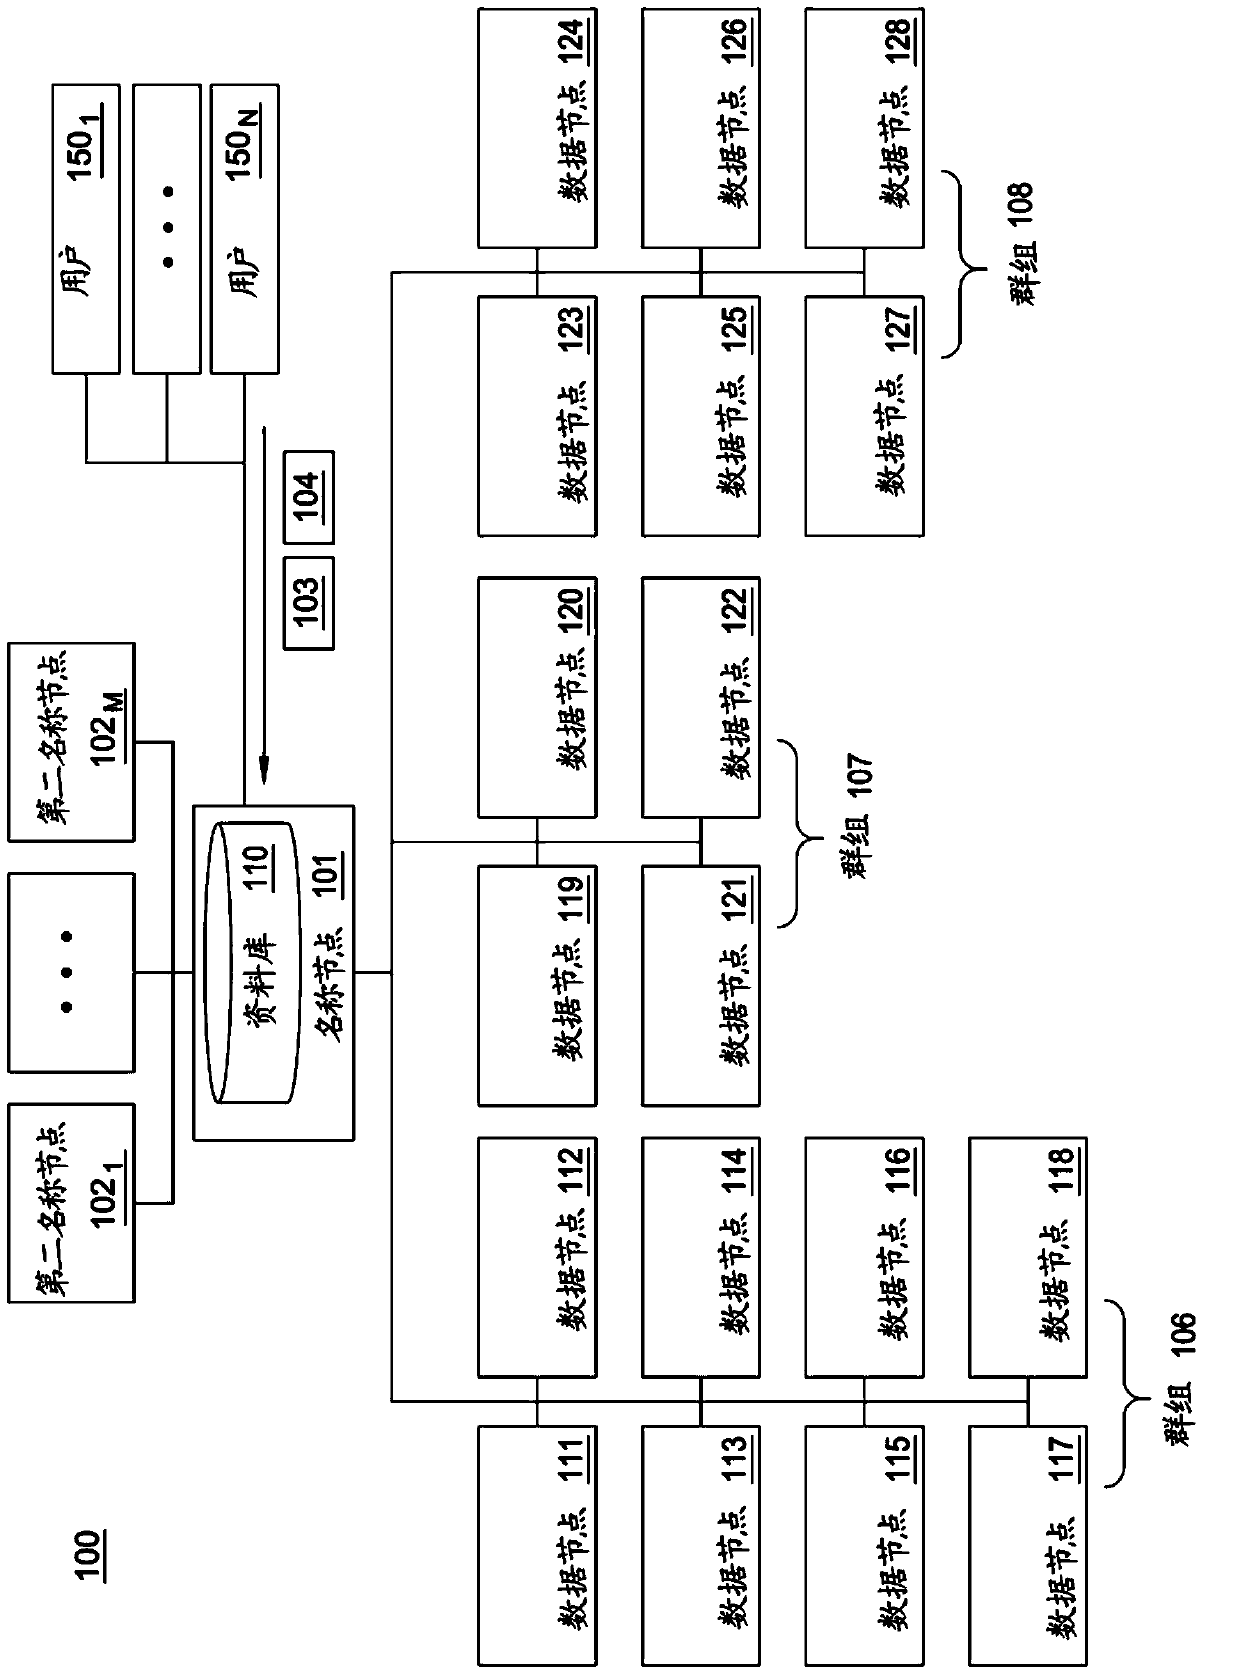 Method and system to select data nodes configured to satisfy a set of requirements